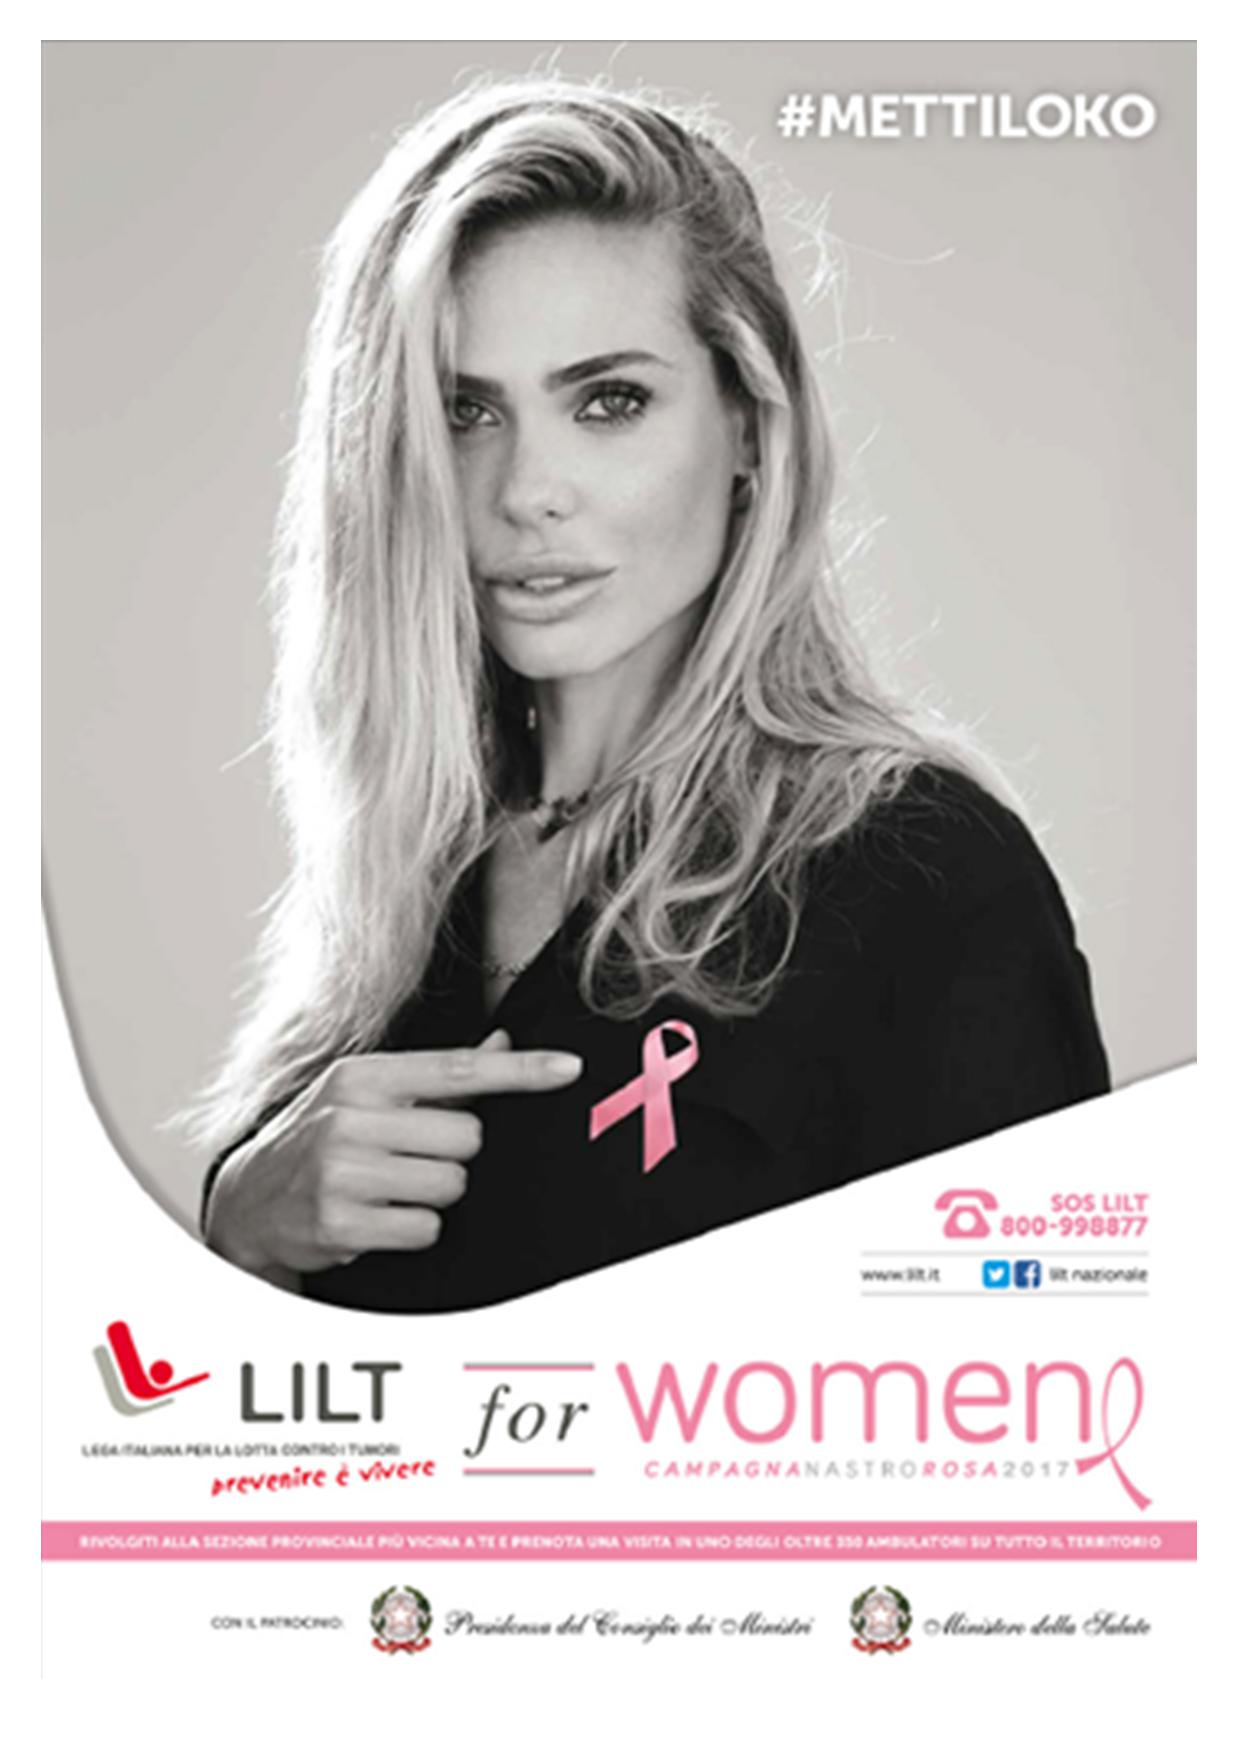 LILT for women: campagna nastro rosa 2021 - FNOMCeO